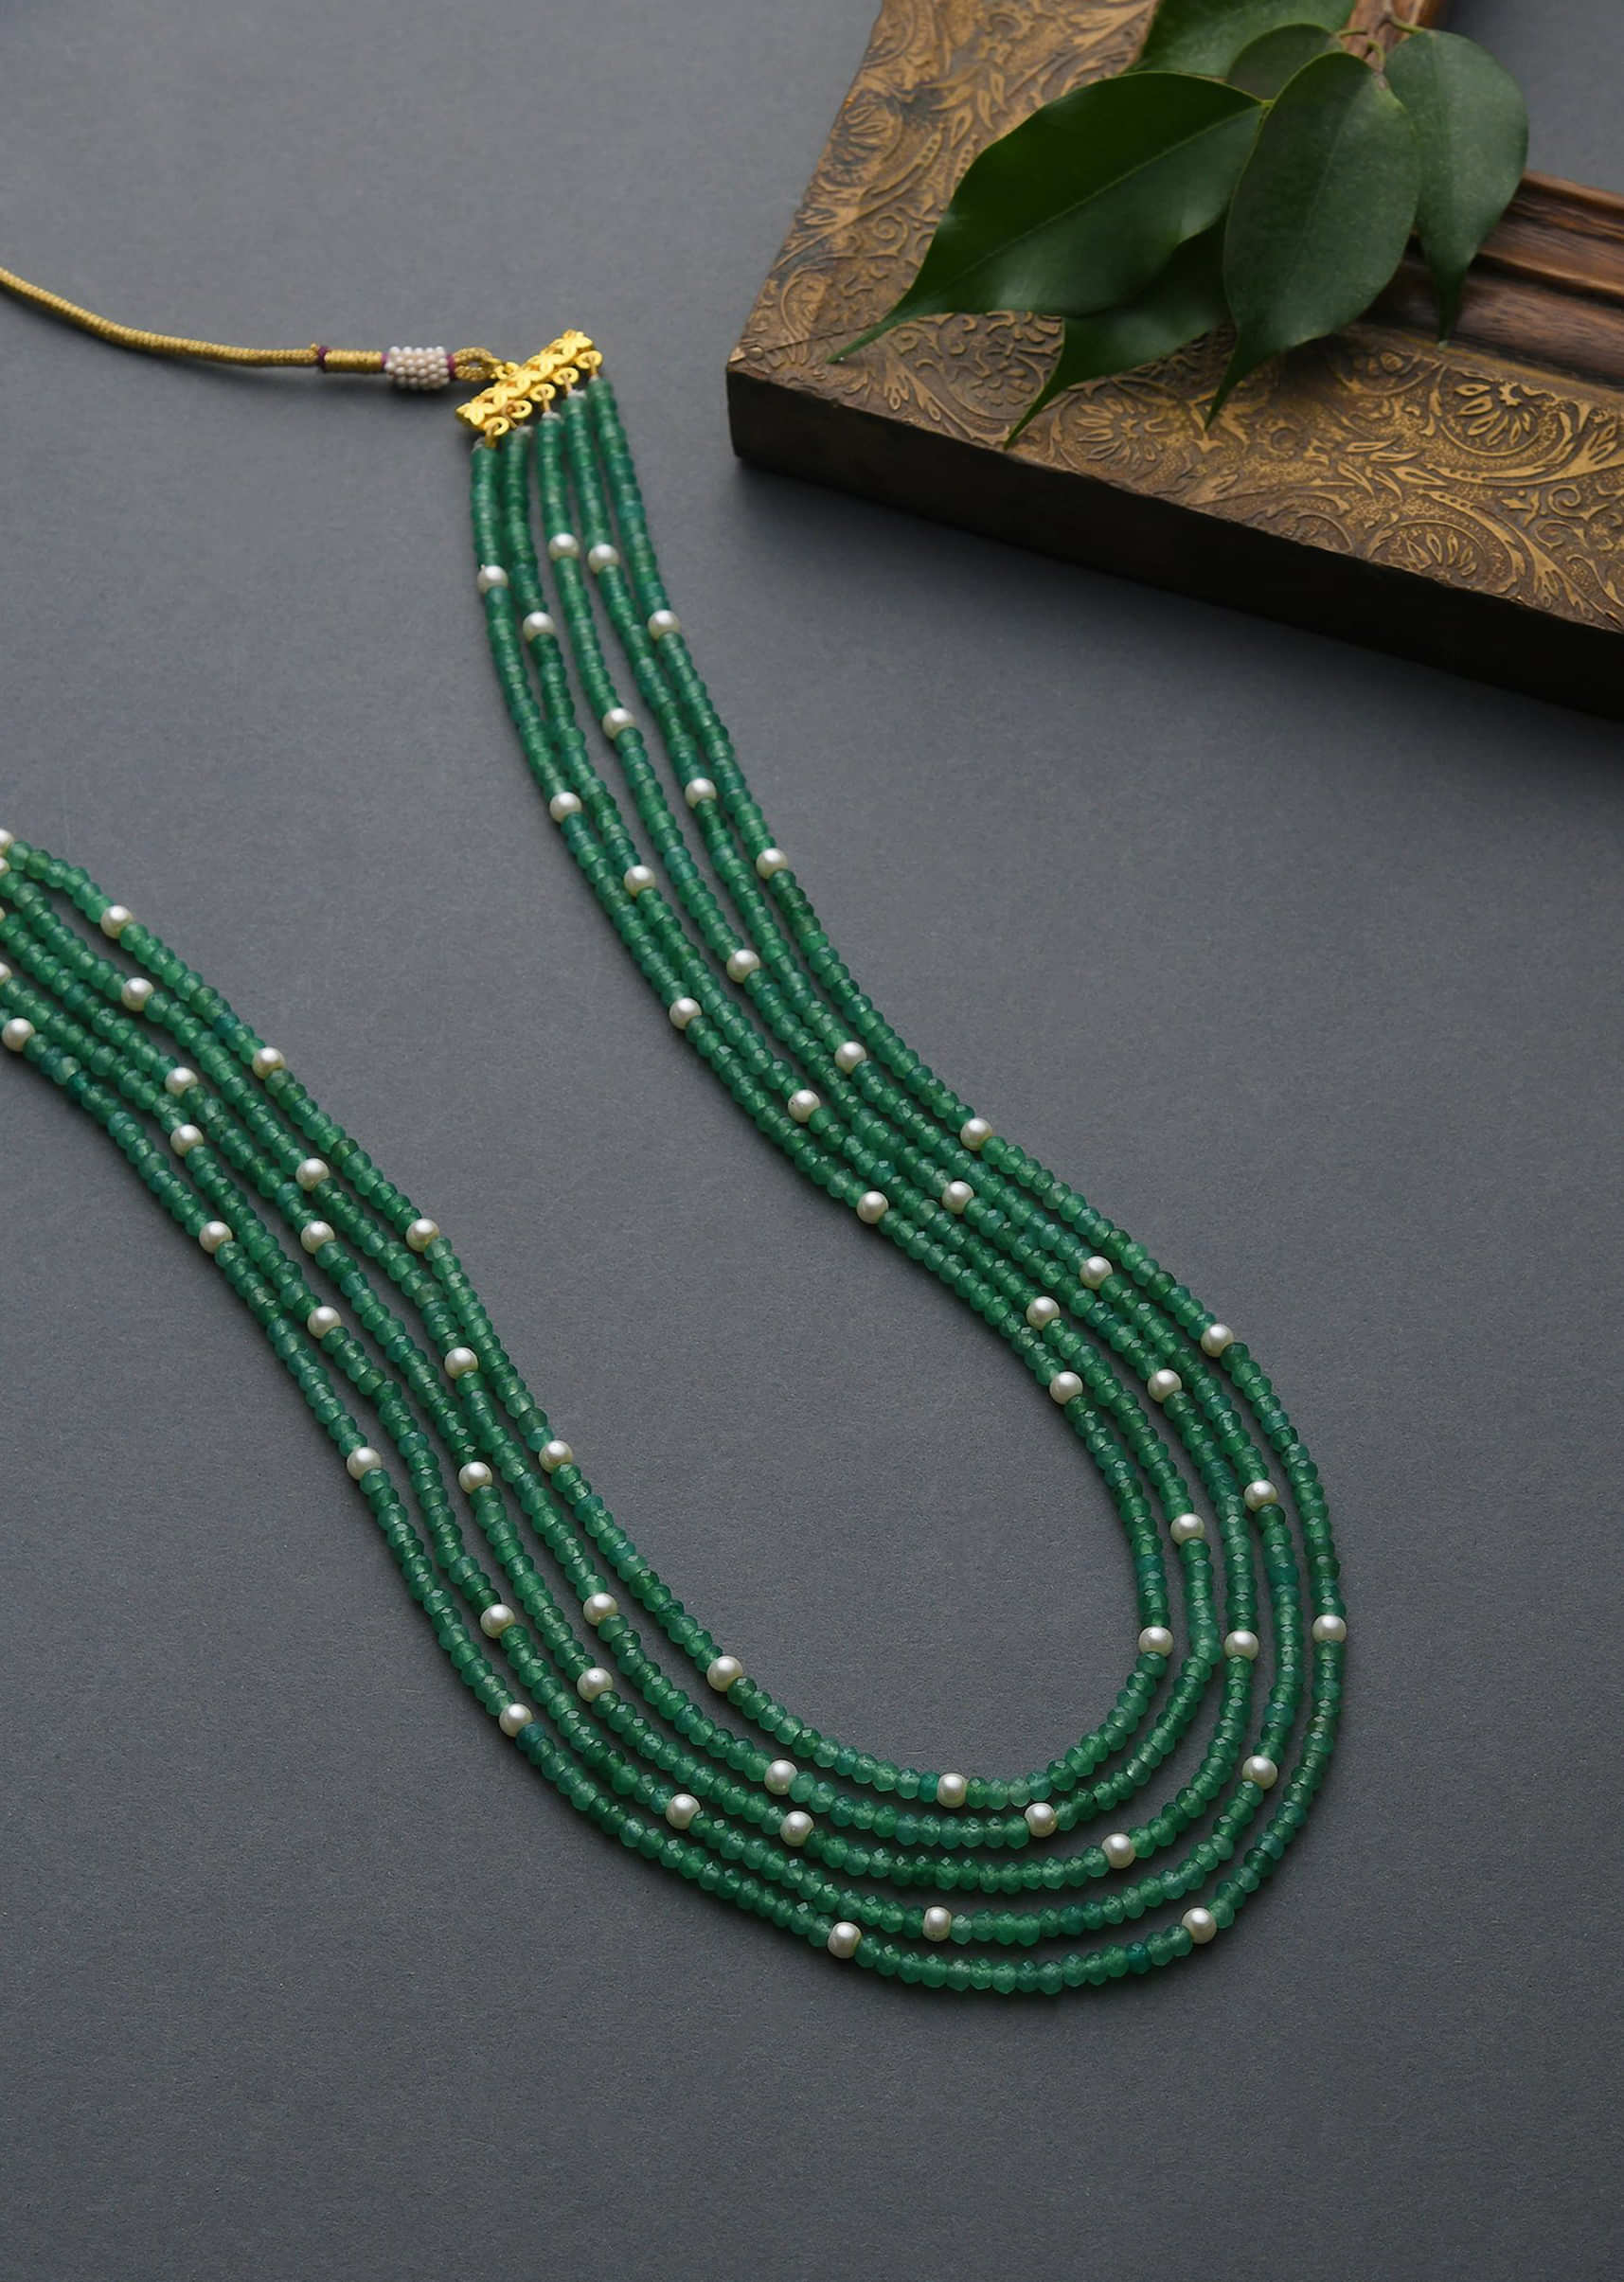 Green Necklace With Multiple Bead Strings And White Stone Accents